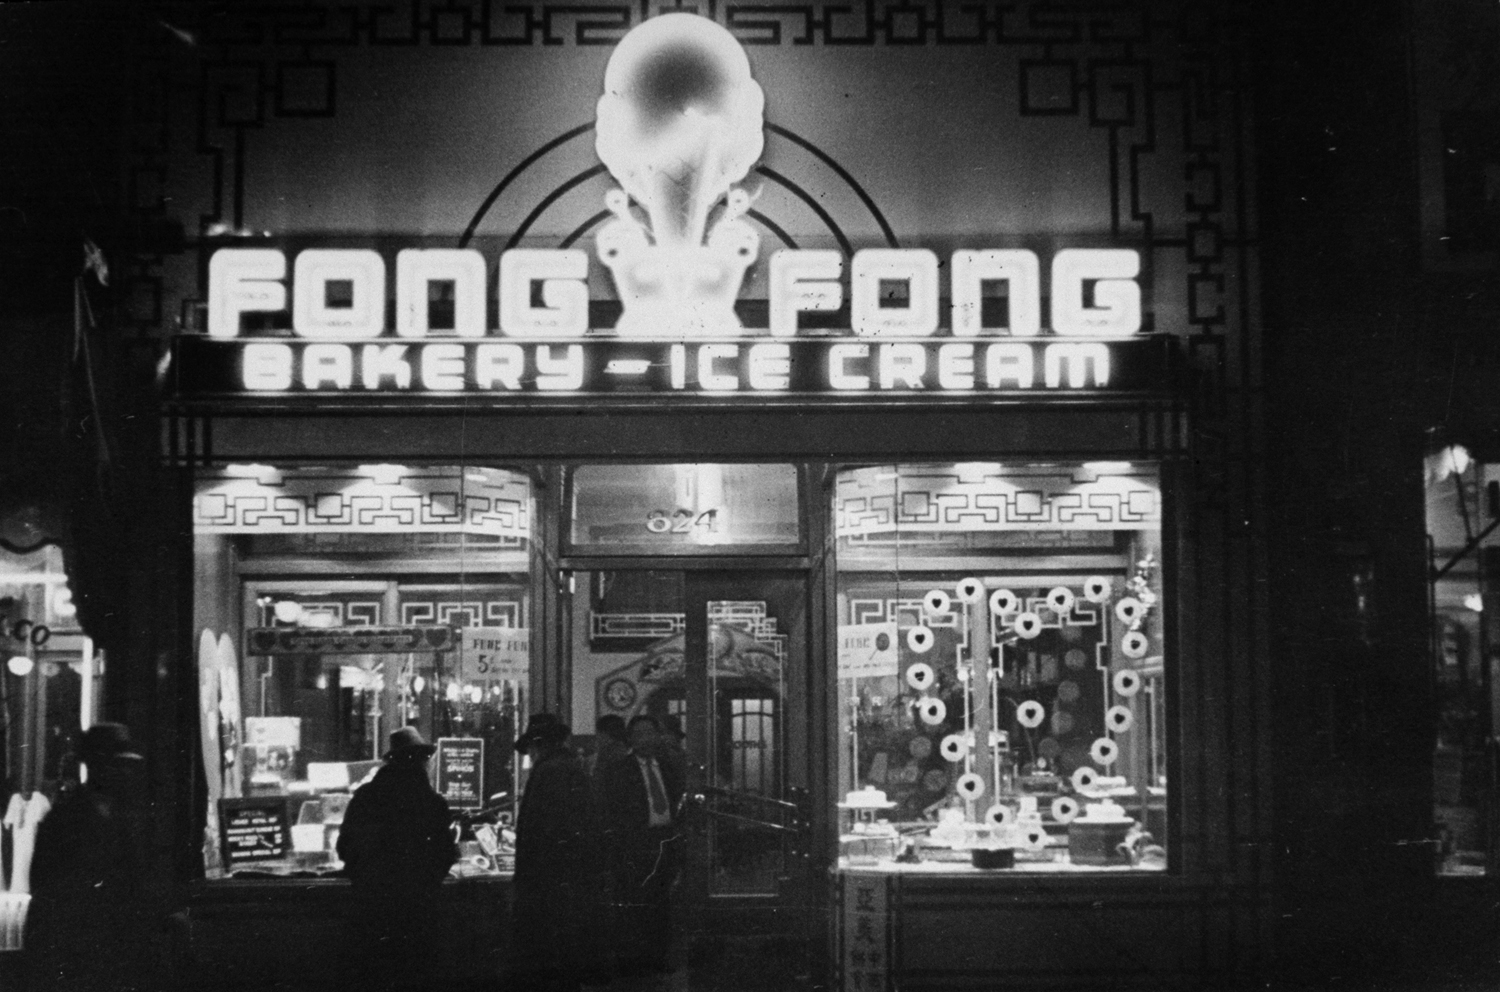 Fong-Fong bakery and ice cream parlor, 1941.